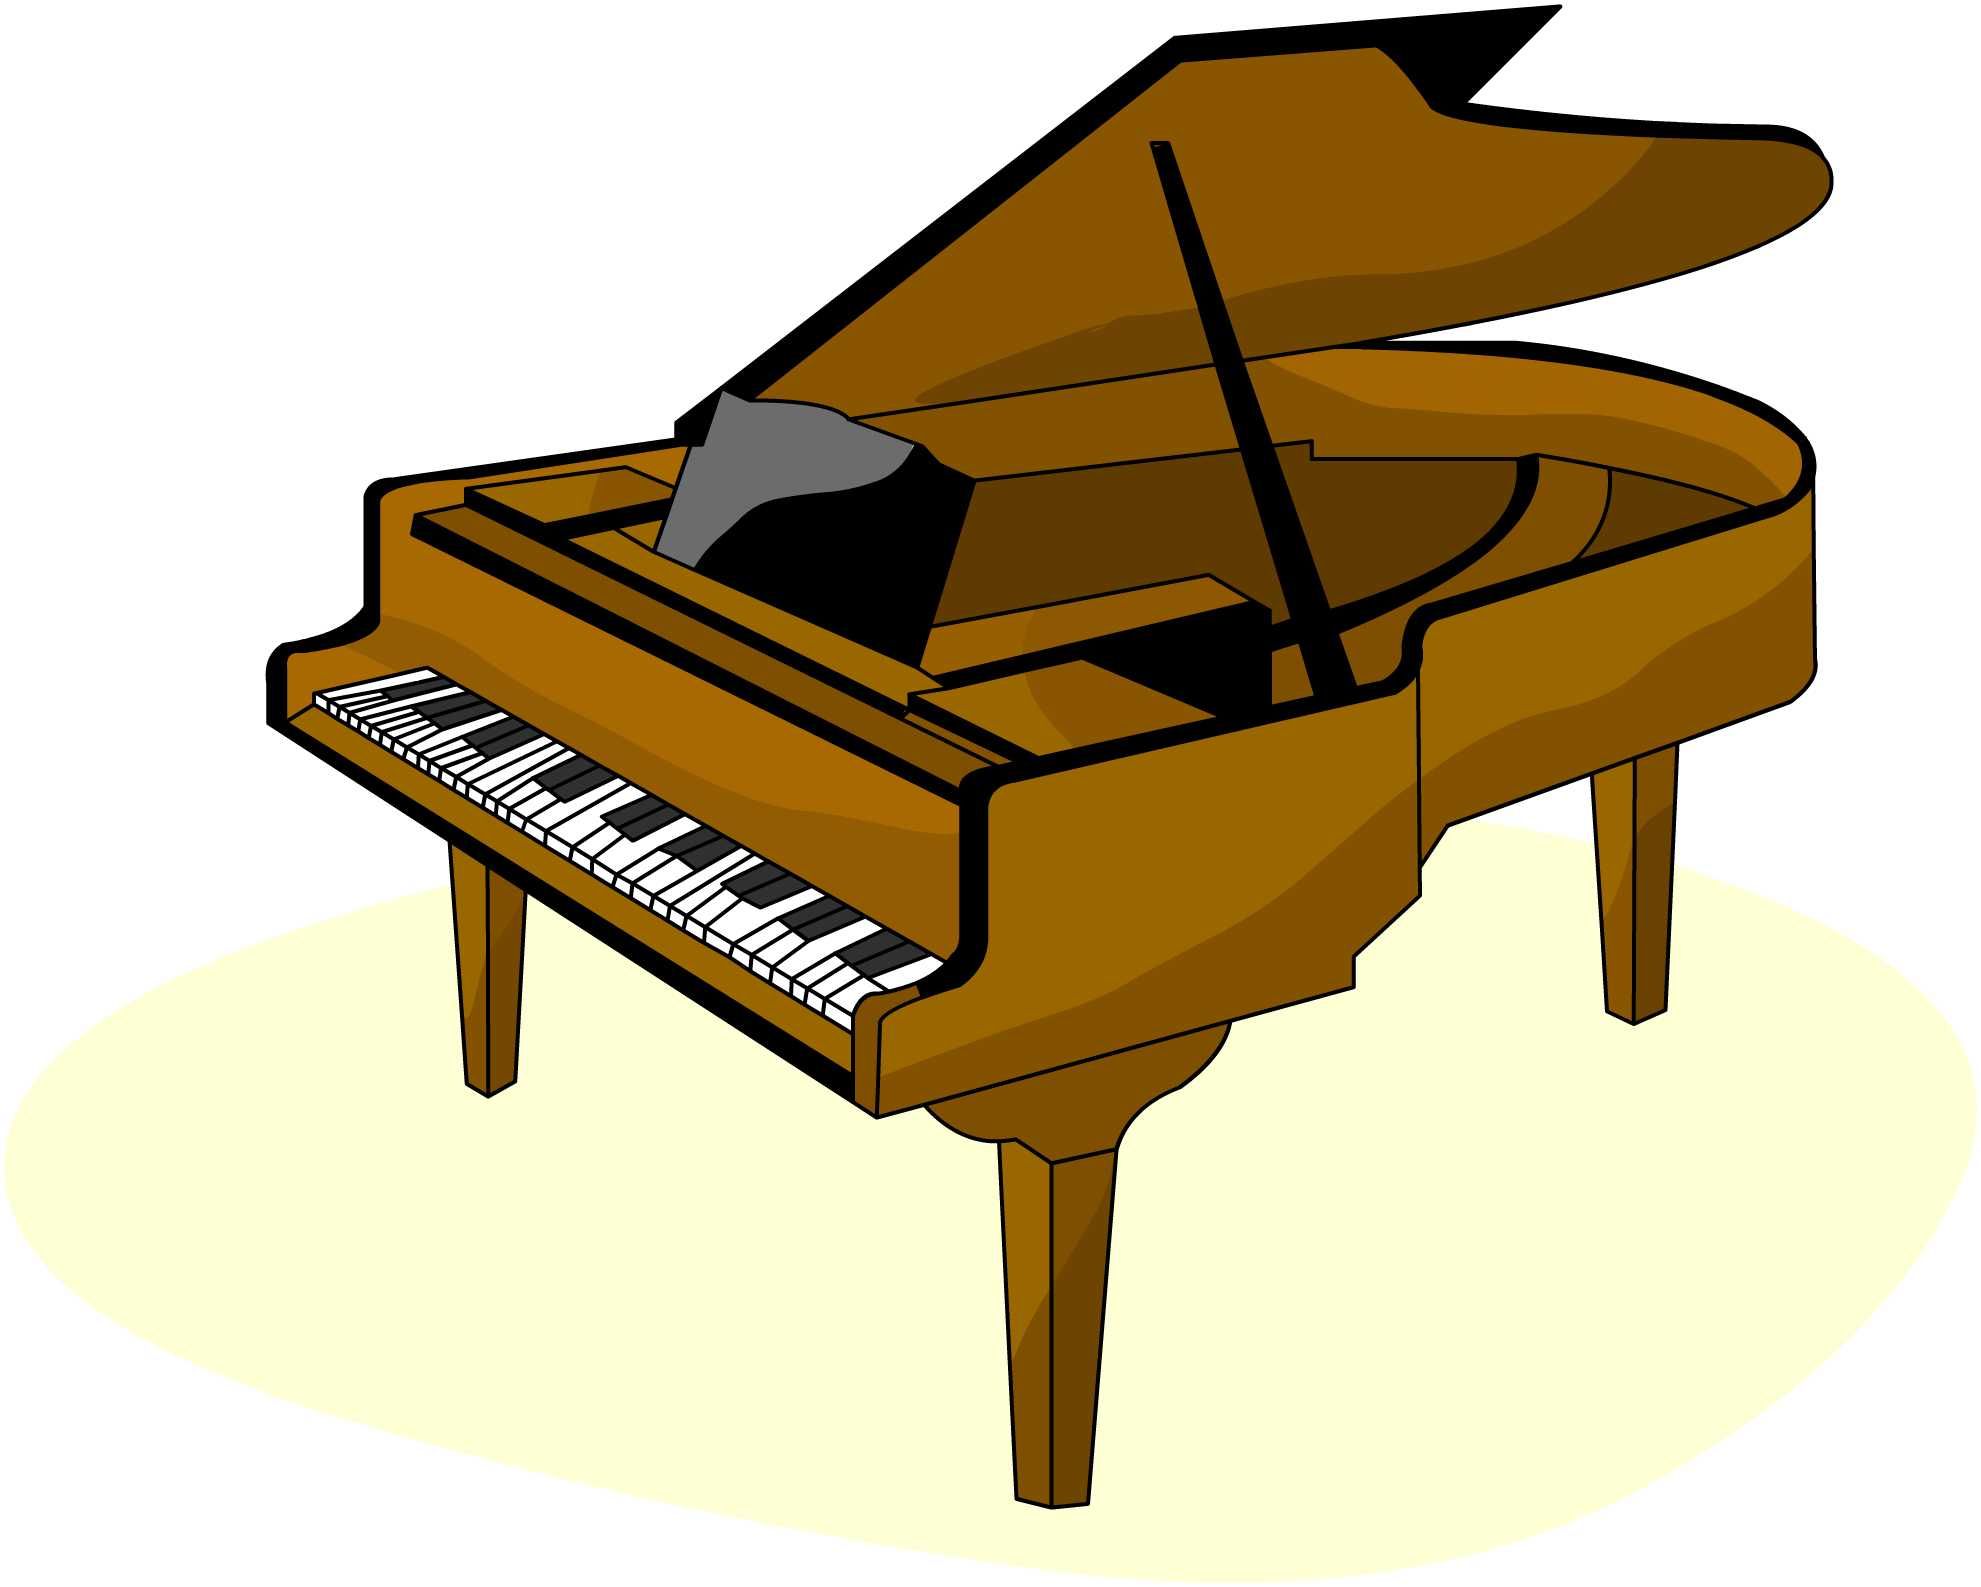 Piano Clipart Black And White | Clipart Panda - Free Clipart Images